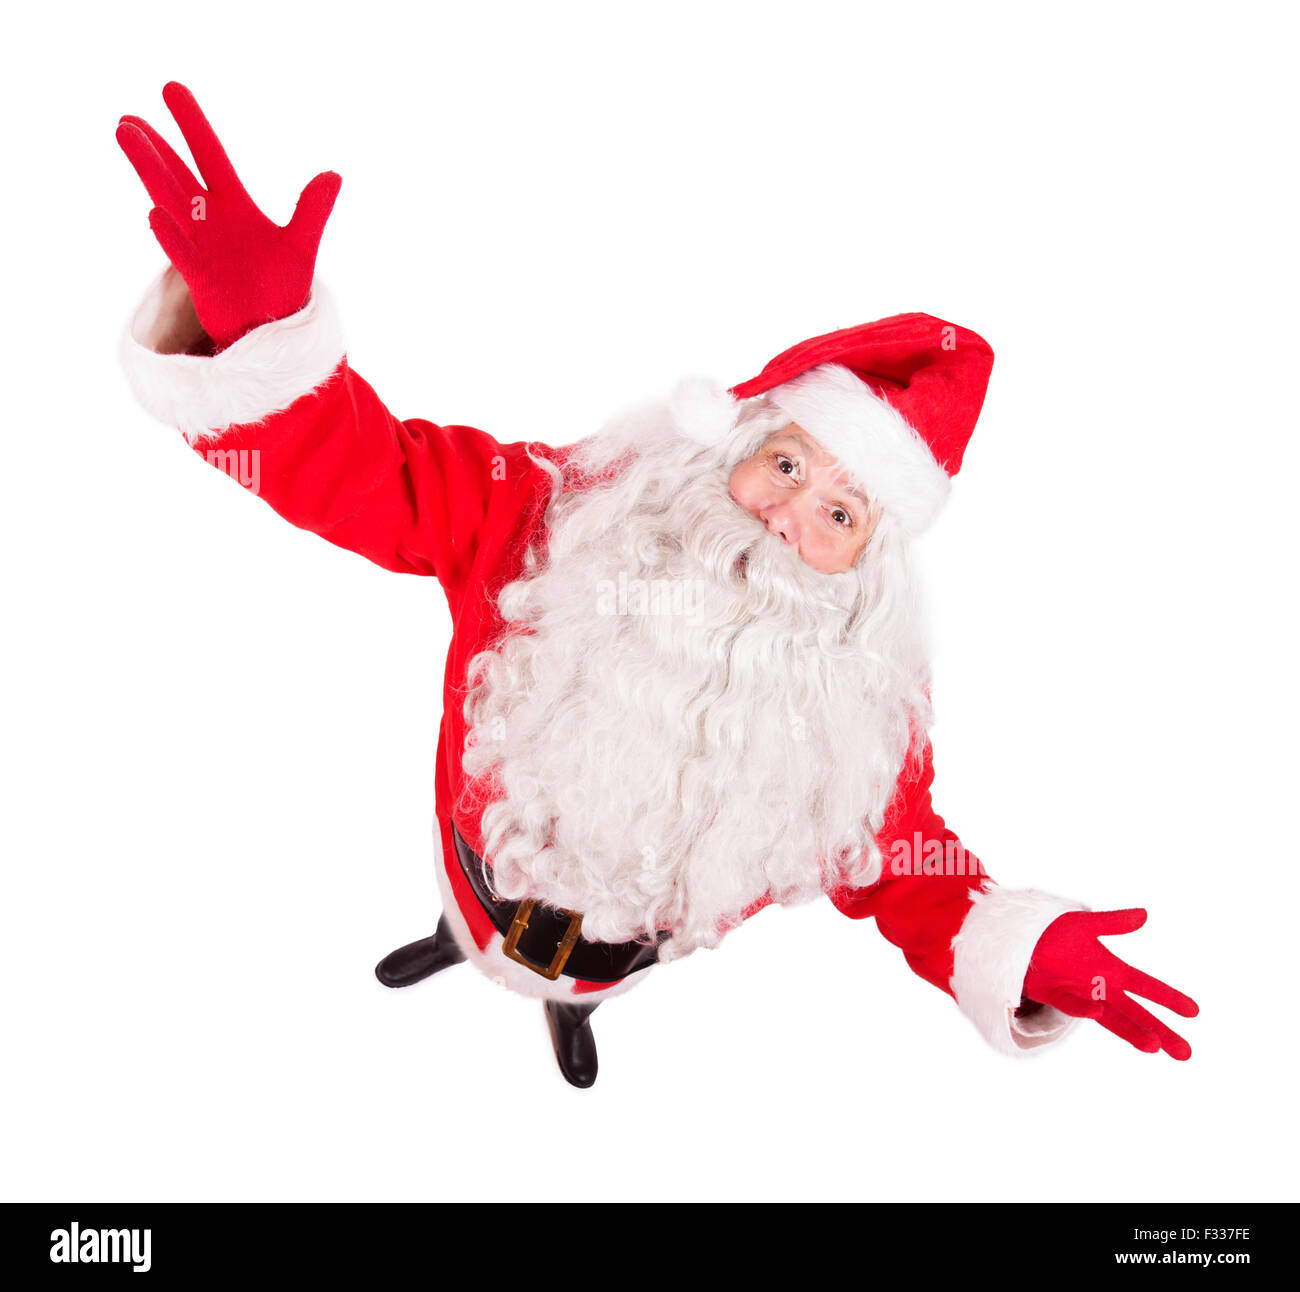 Santa Claus spread his arms wide  and looking up to camera Stock Photo